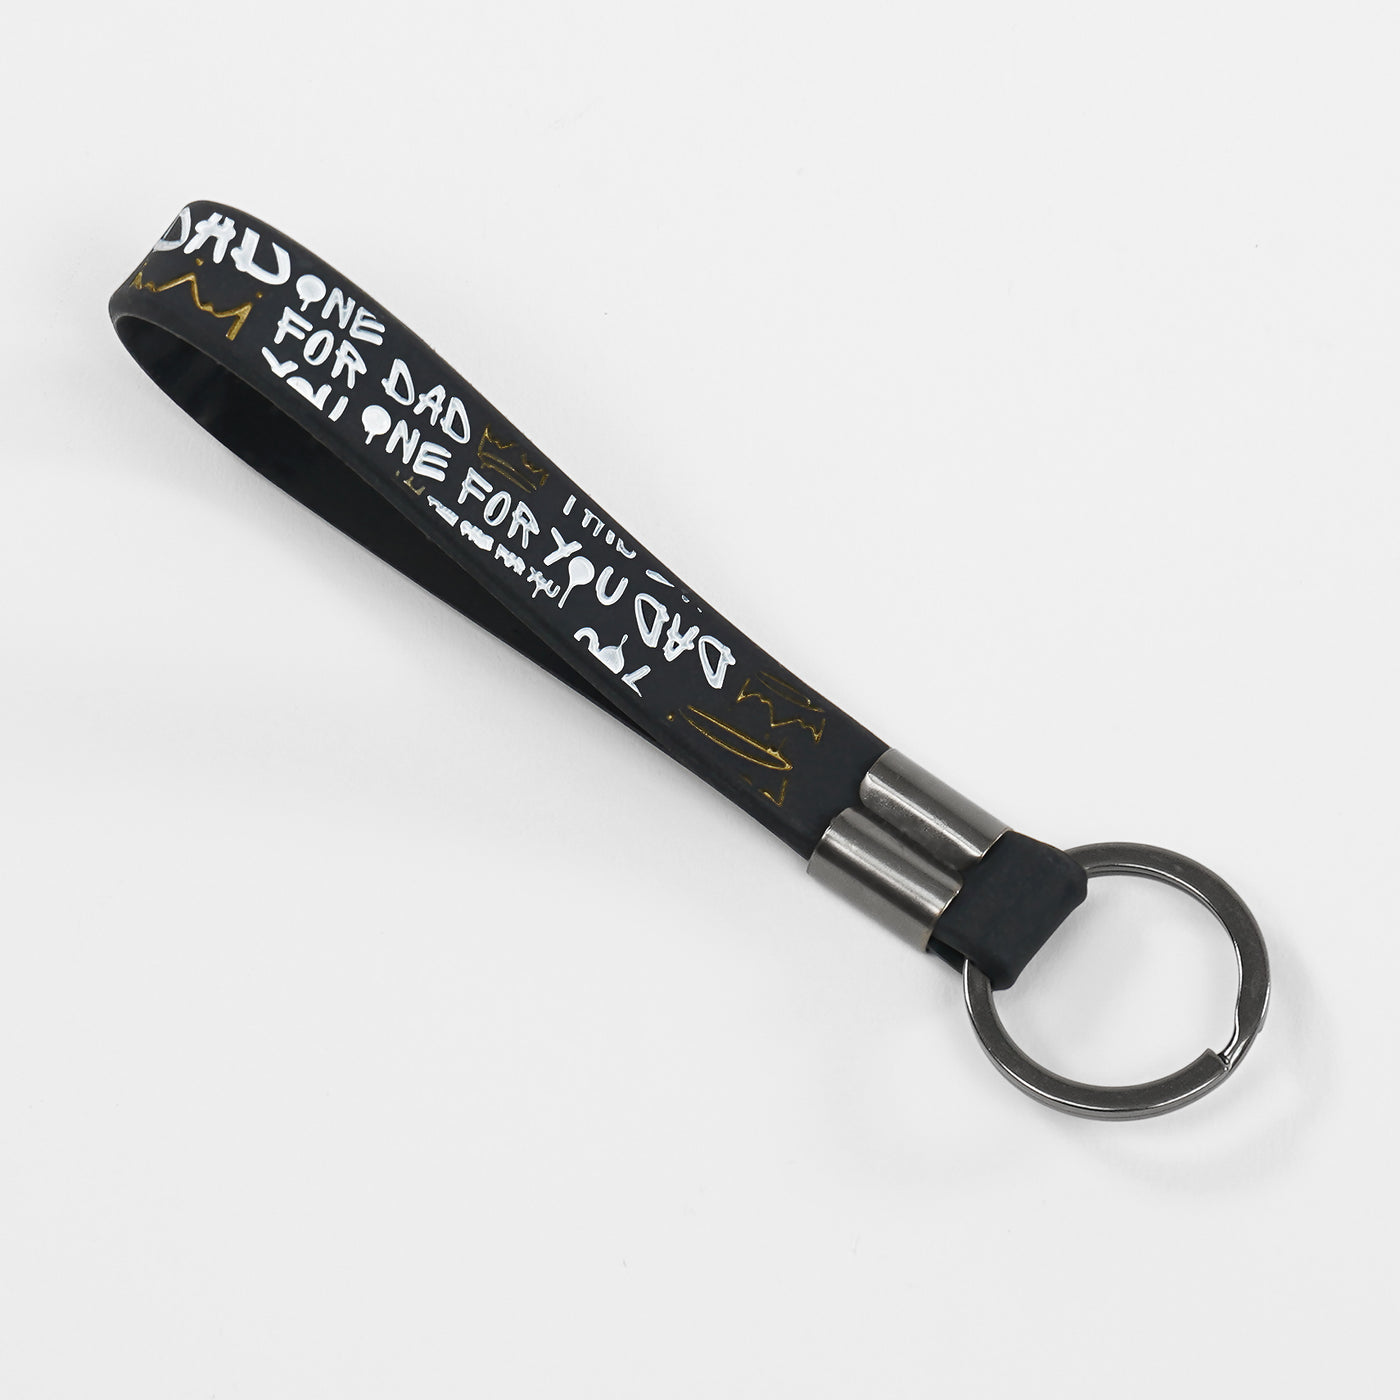 Dad This One For You Black Silicone Keychain